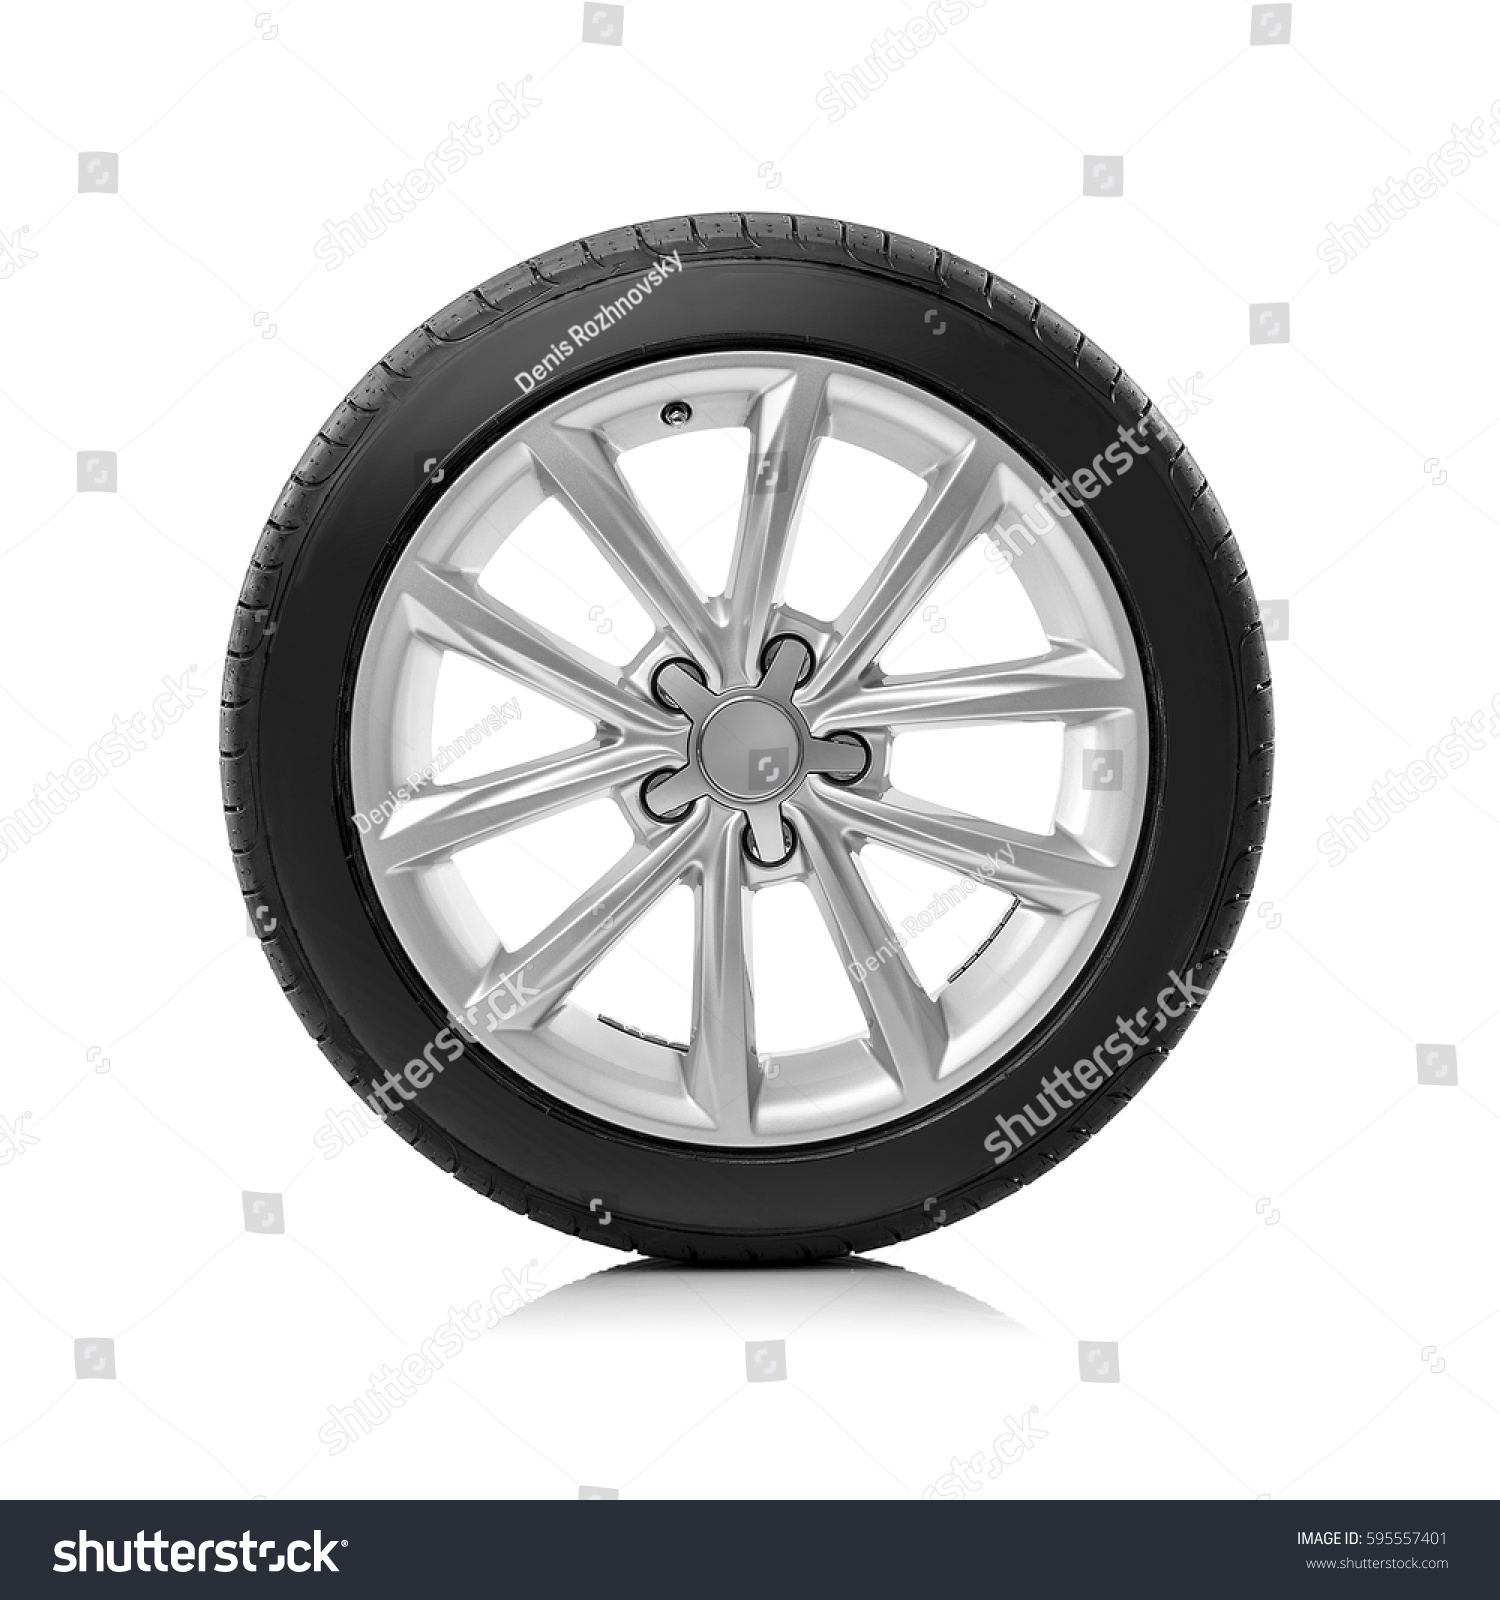 Car wheels isolated on a white background. #595557401